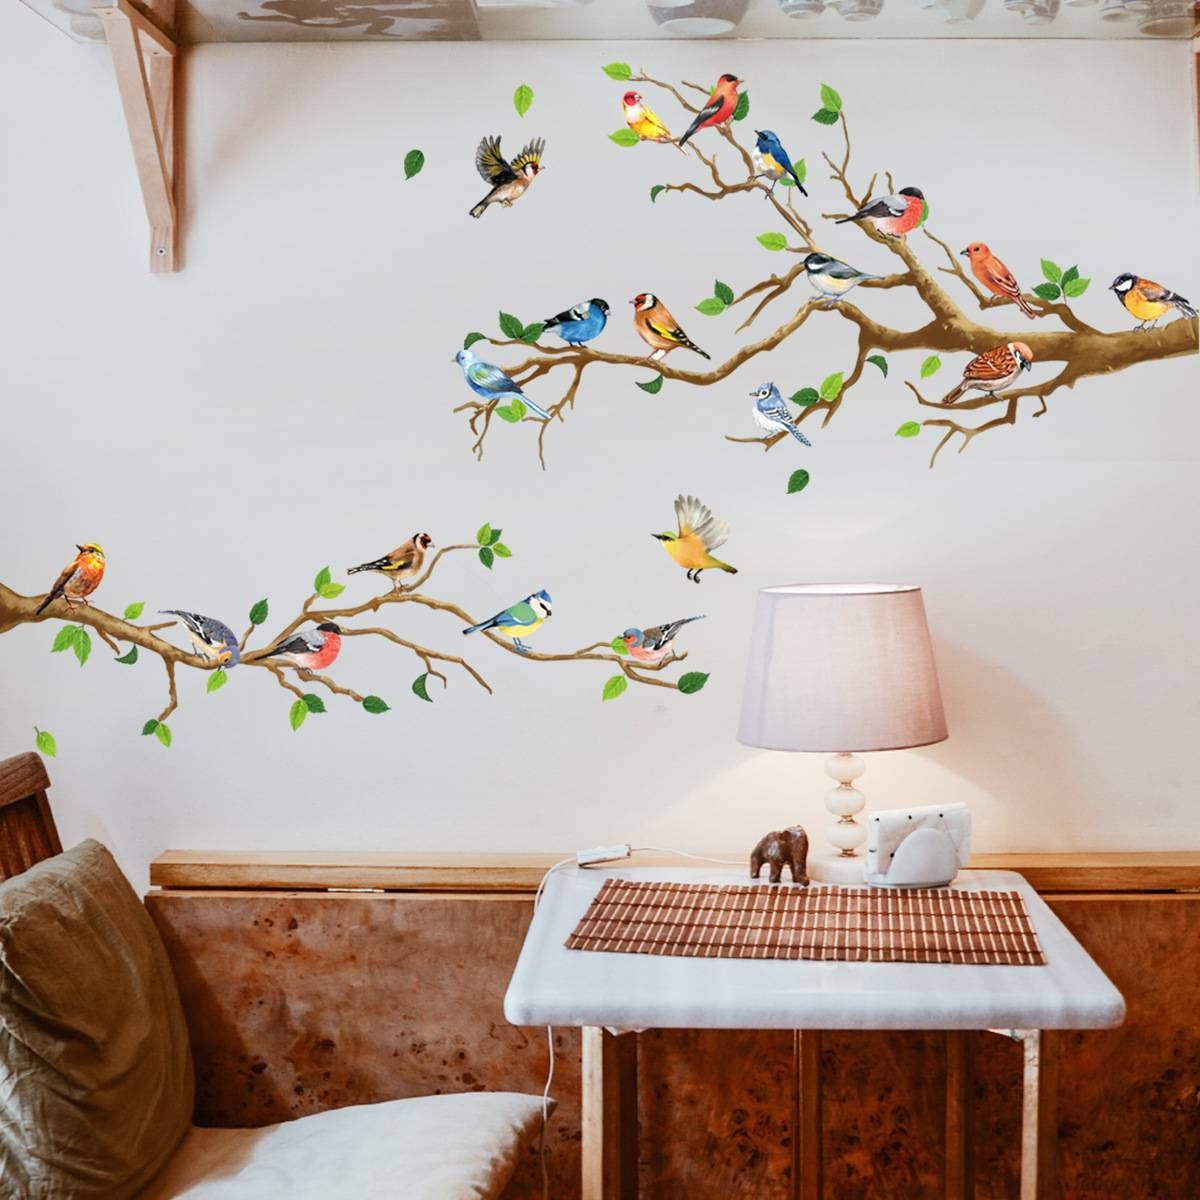 Tropical Colorful Birds Animals Tree Branches Background Wall Art  Decoration Pvc Removable Sticker In Best And Newest Colorful Branching Wall Art (View 20 of 20)